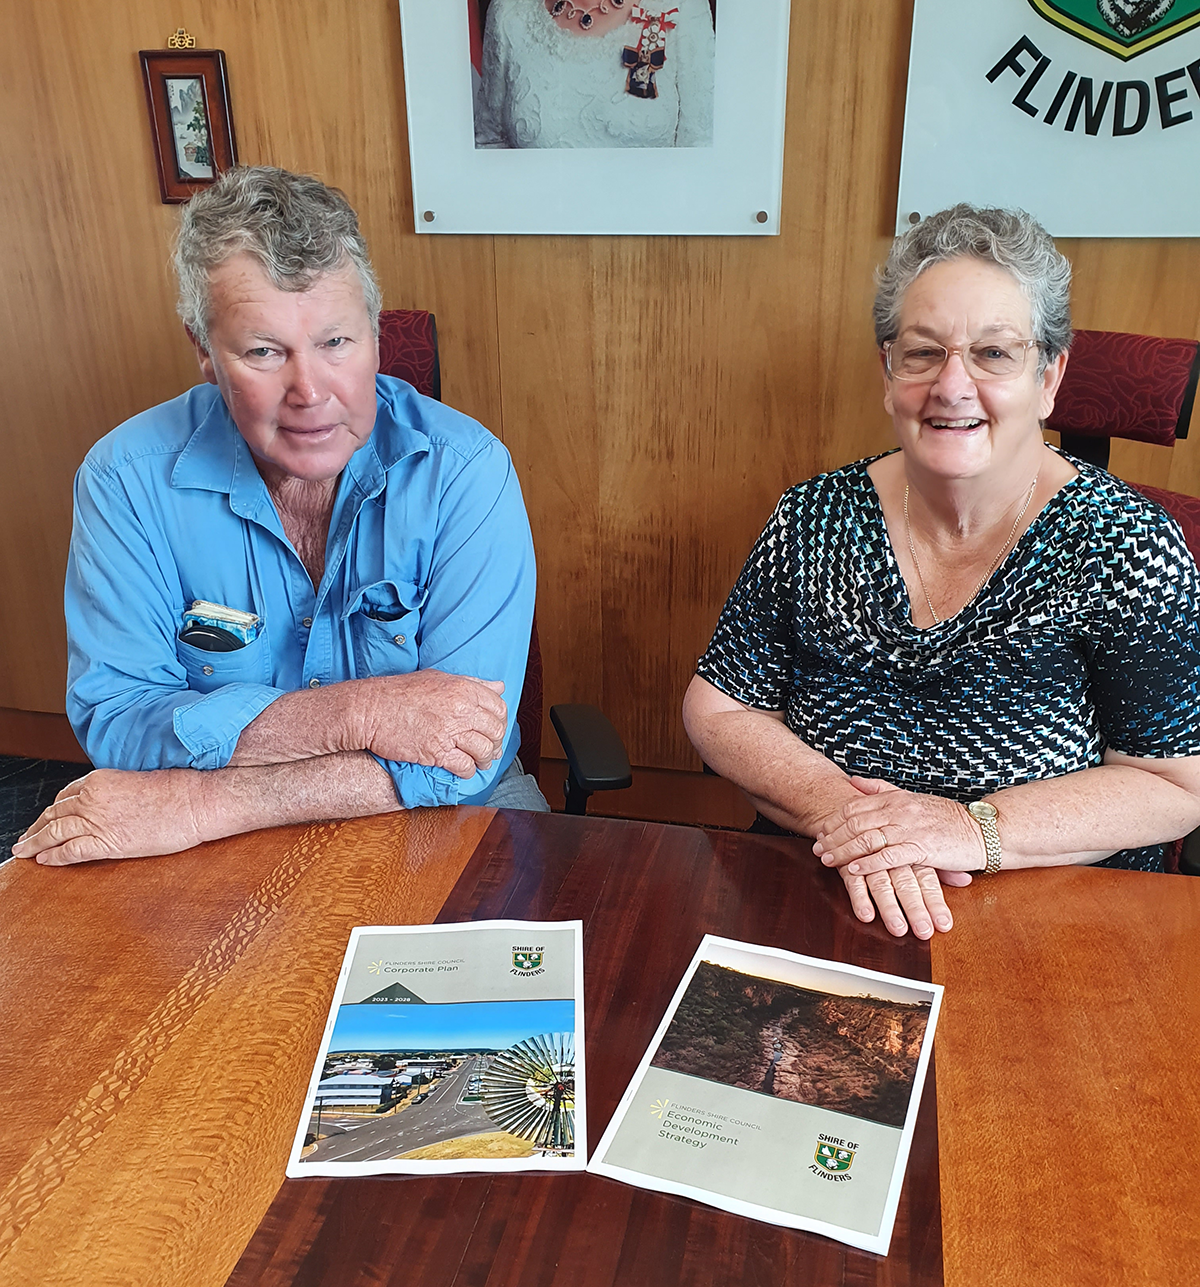 Council launches new plans to set future direction of Flinders Shire